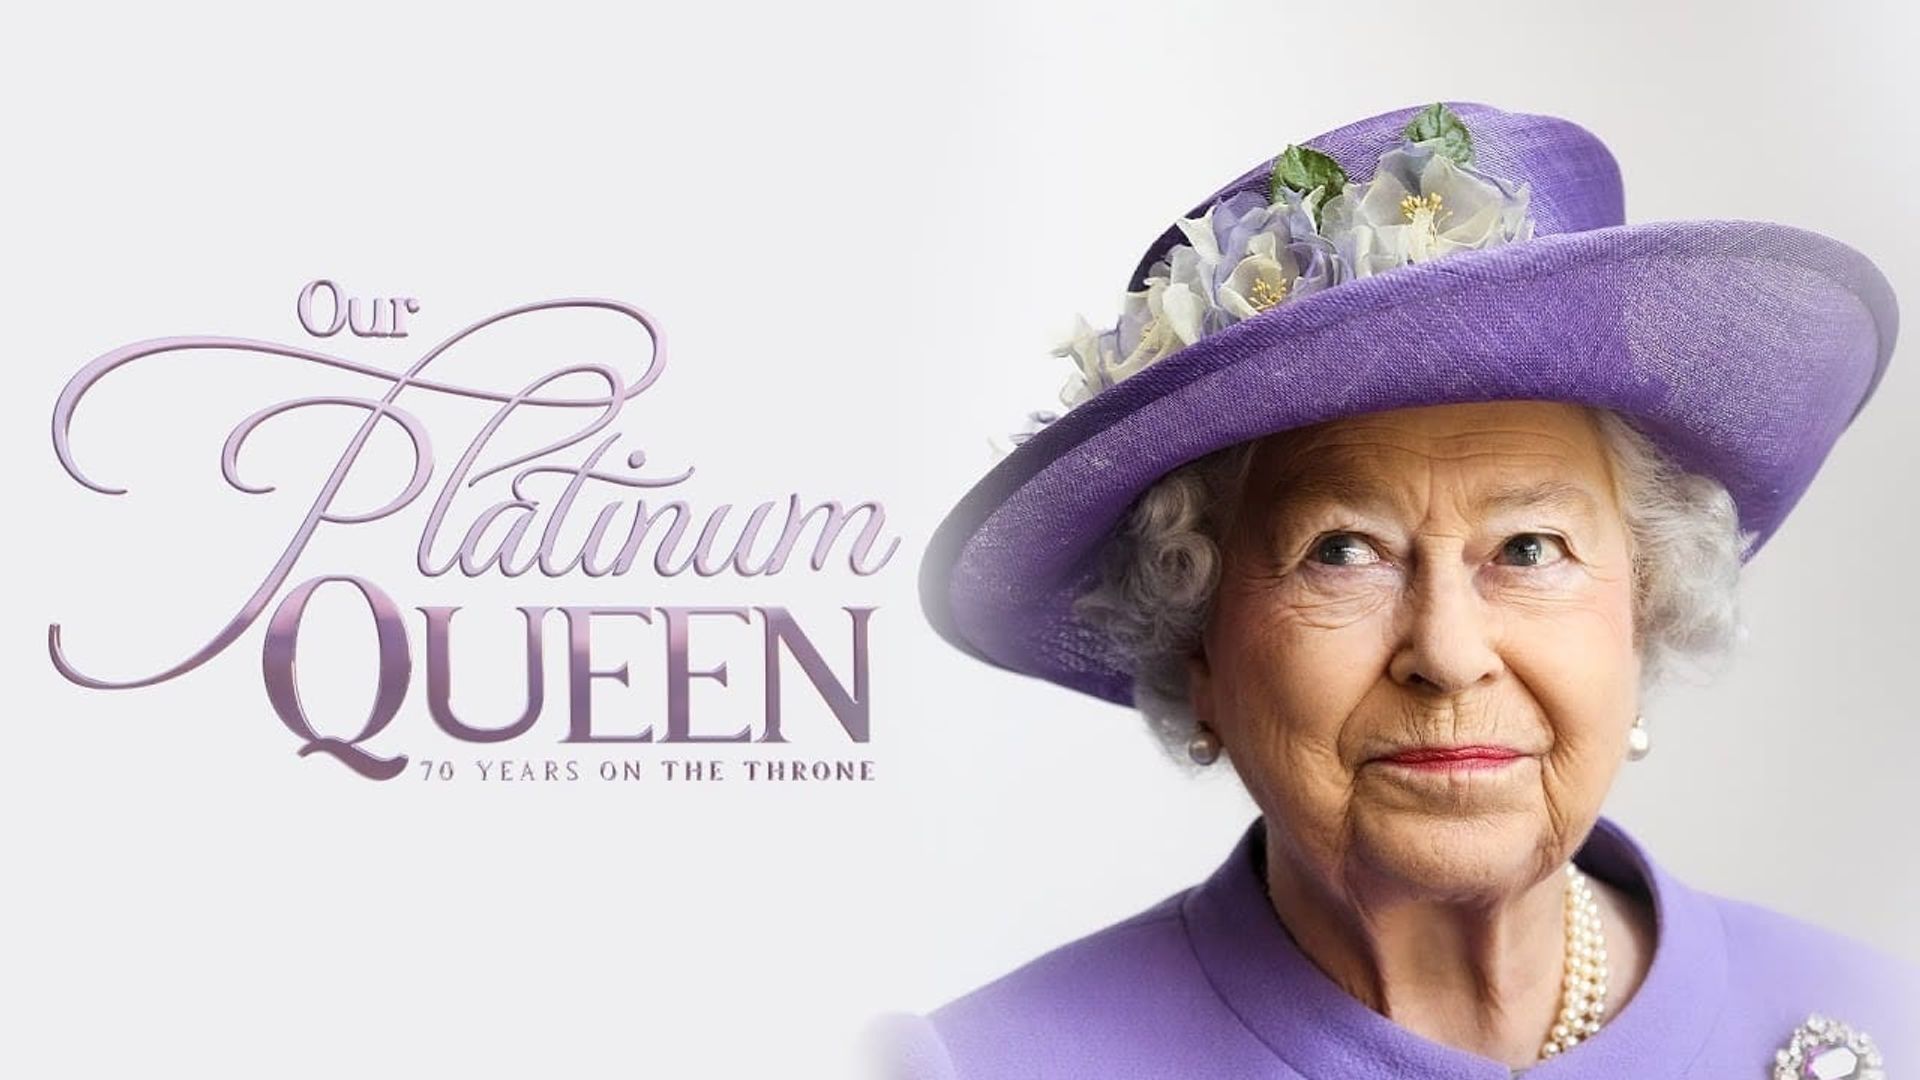 Our Platinum Queen: 70 Years on the Throne background